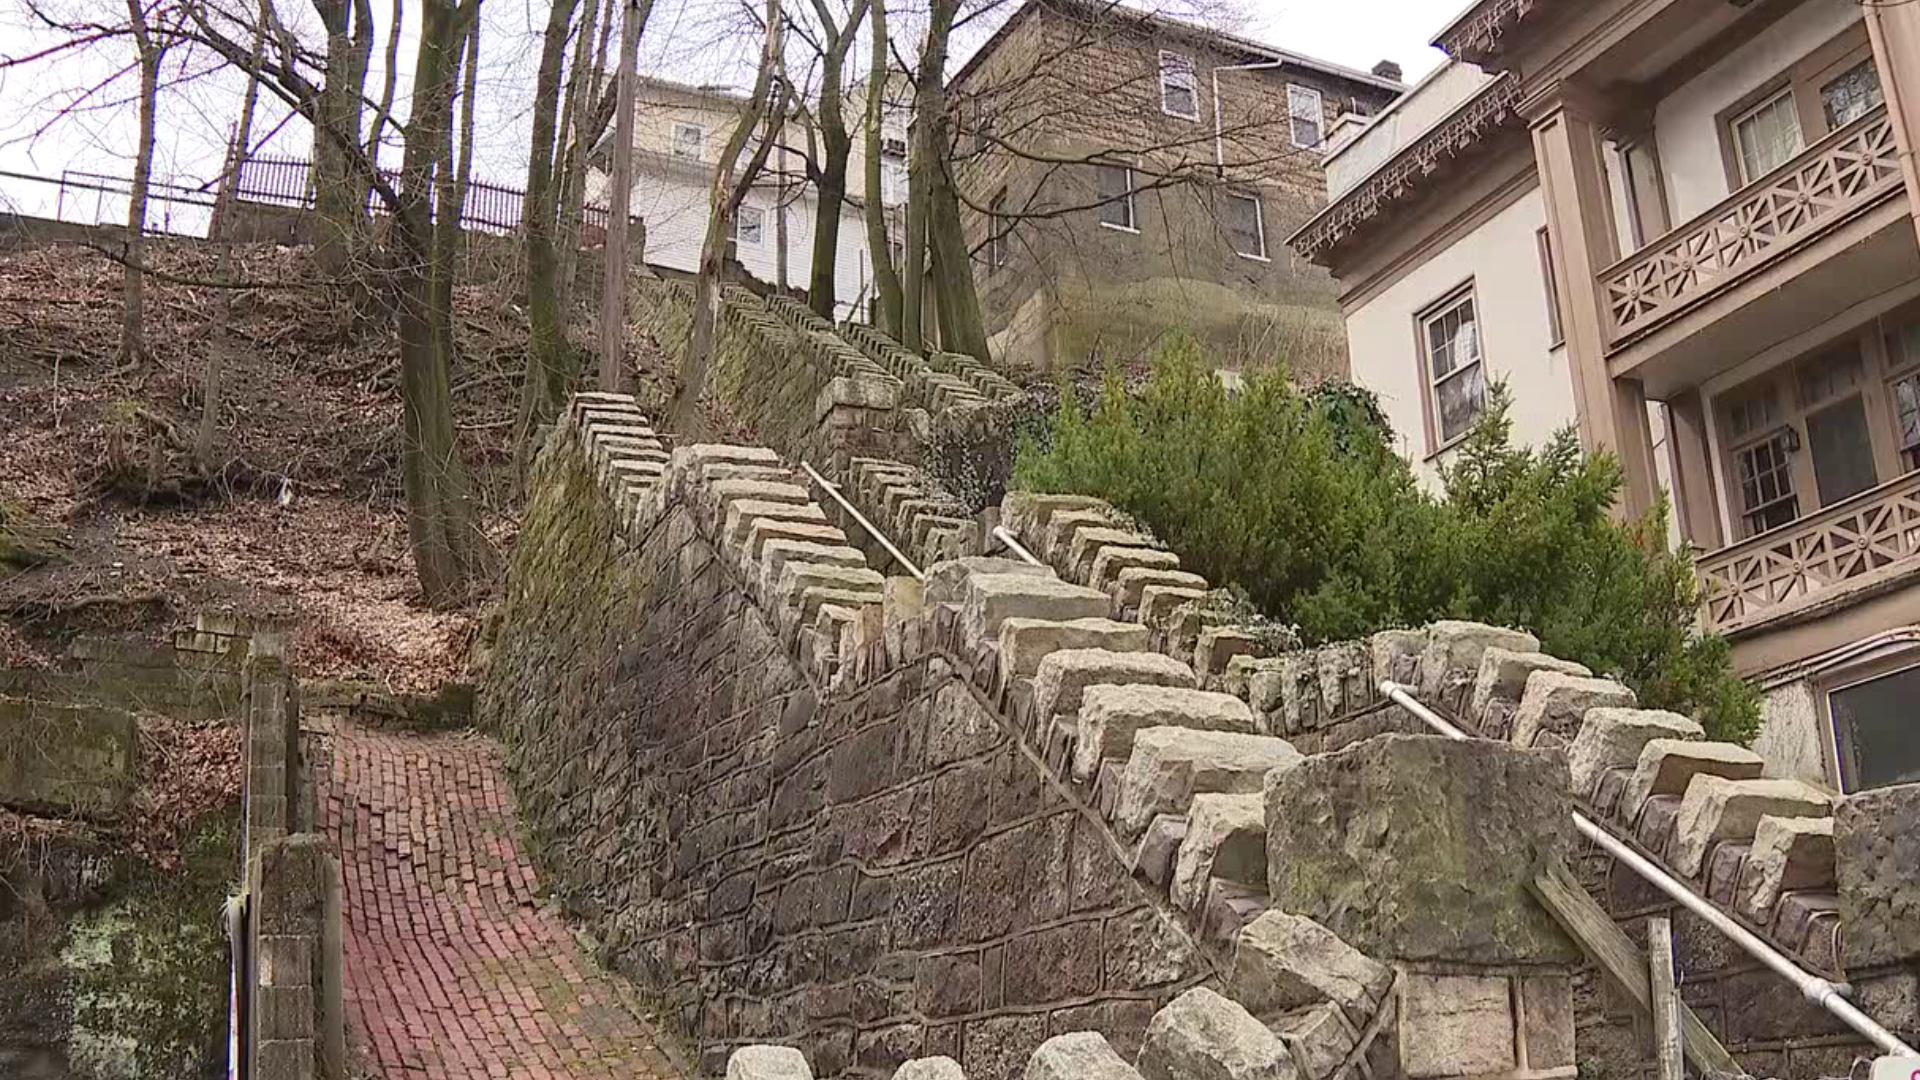 They are known as "99 steps" and they've been around for more than 100 years. Newswatch 16's Nikki Krize shows how you can help.